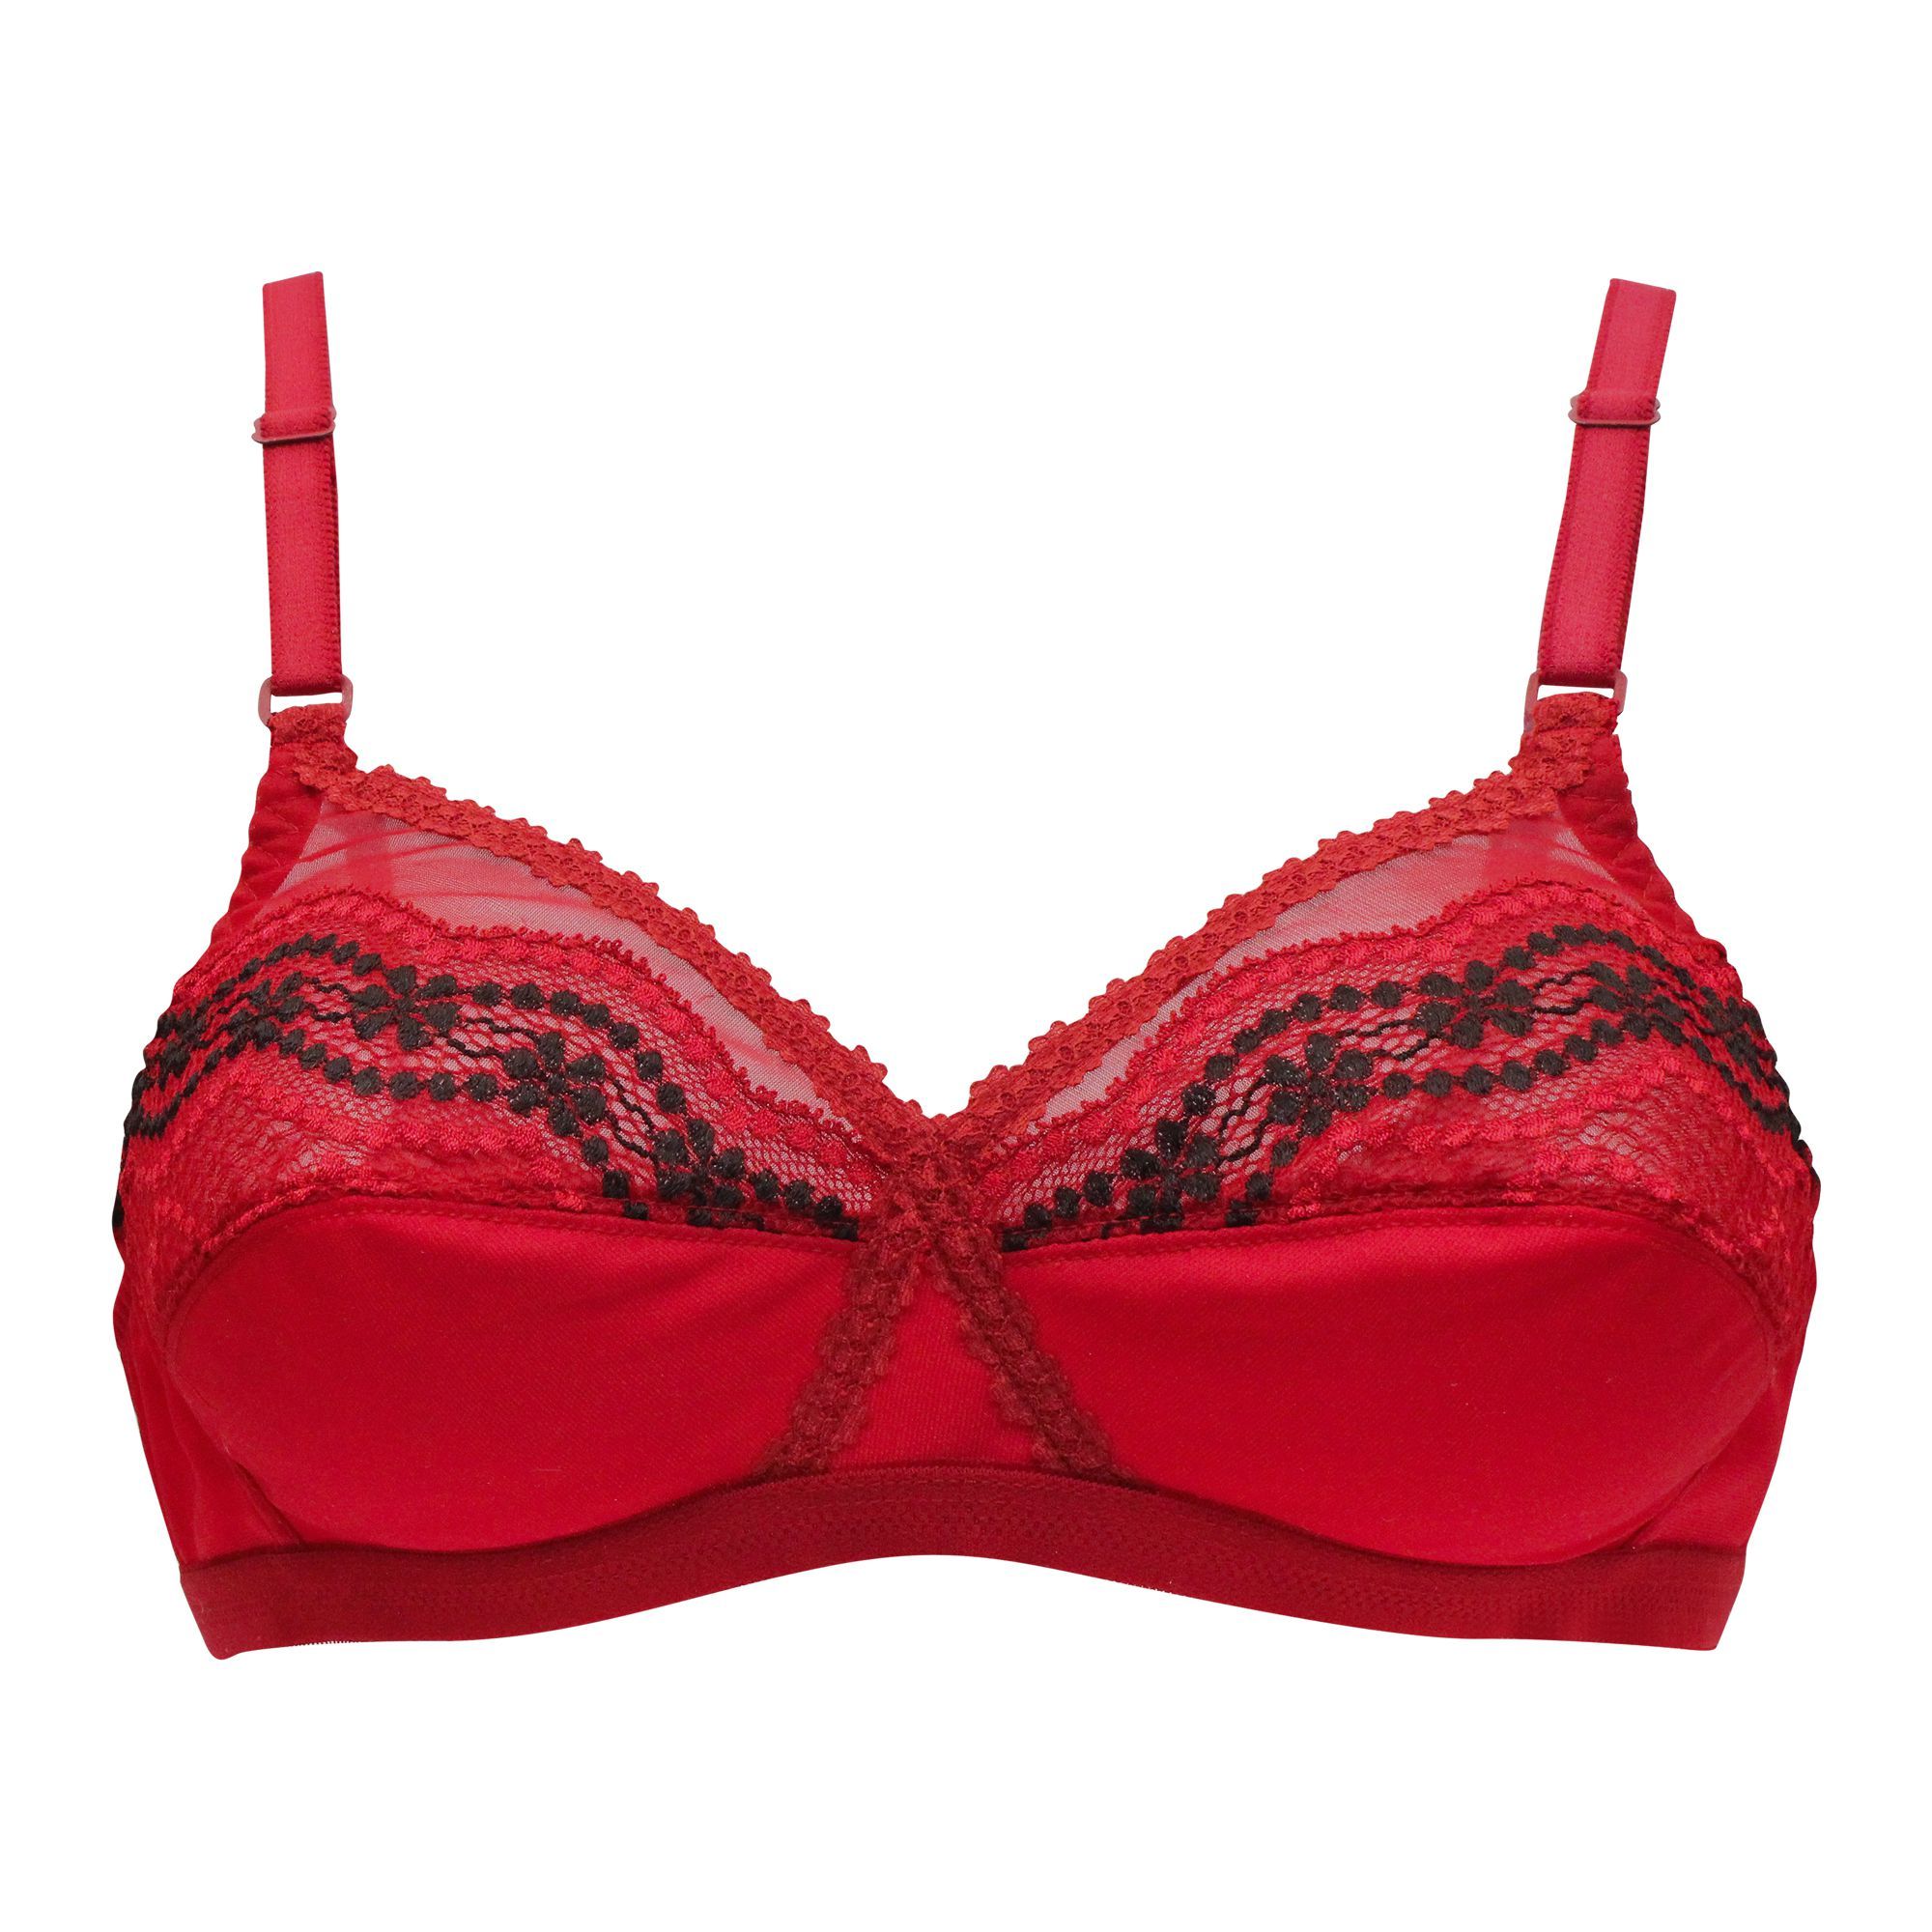 Purchase IFG Mystique N Bra, Maroon Online at Special Price in Pakistan 